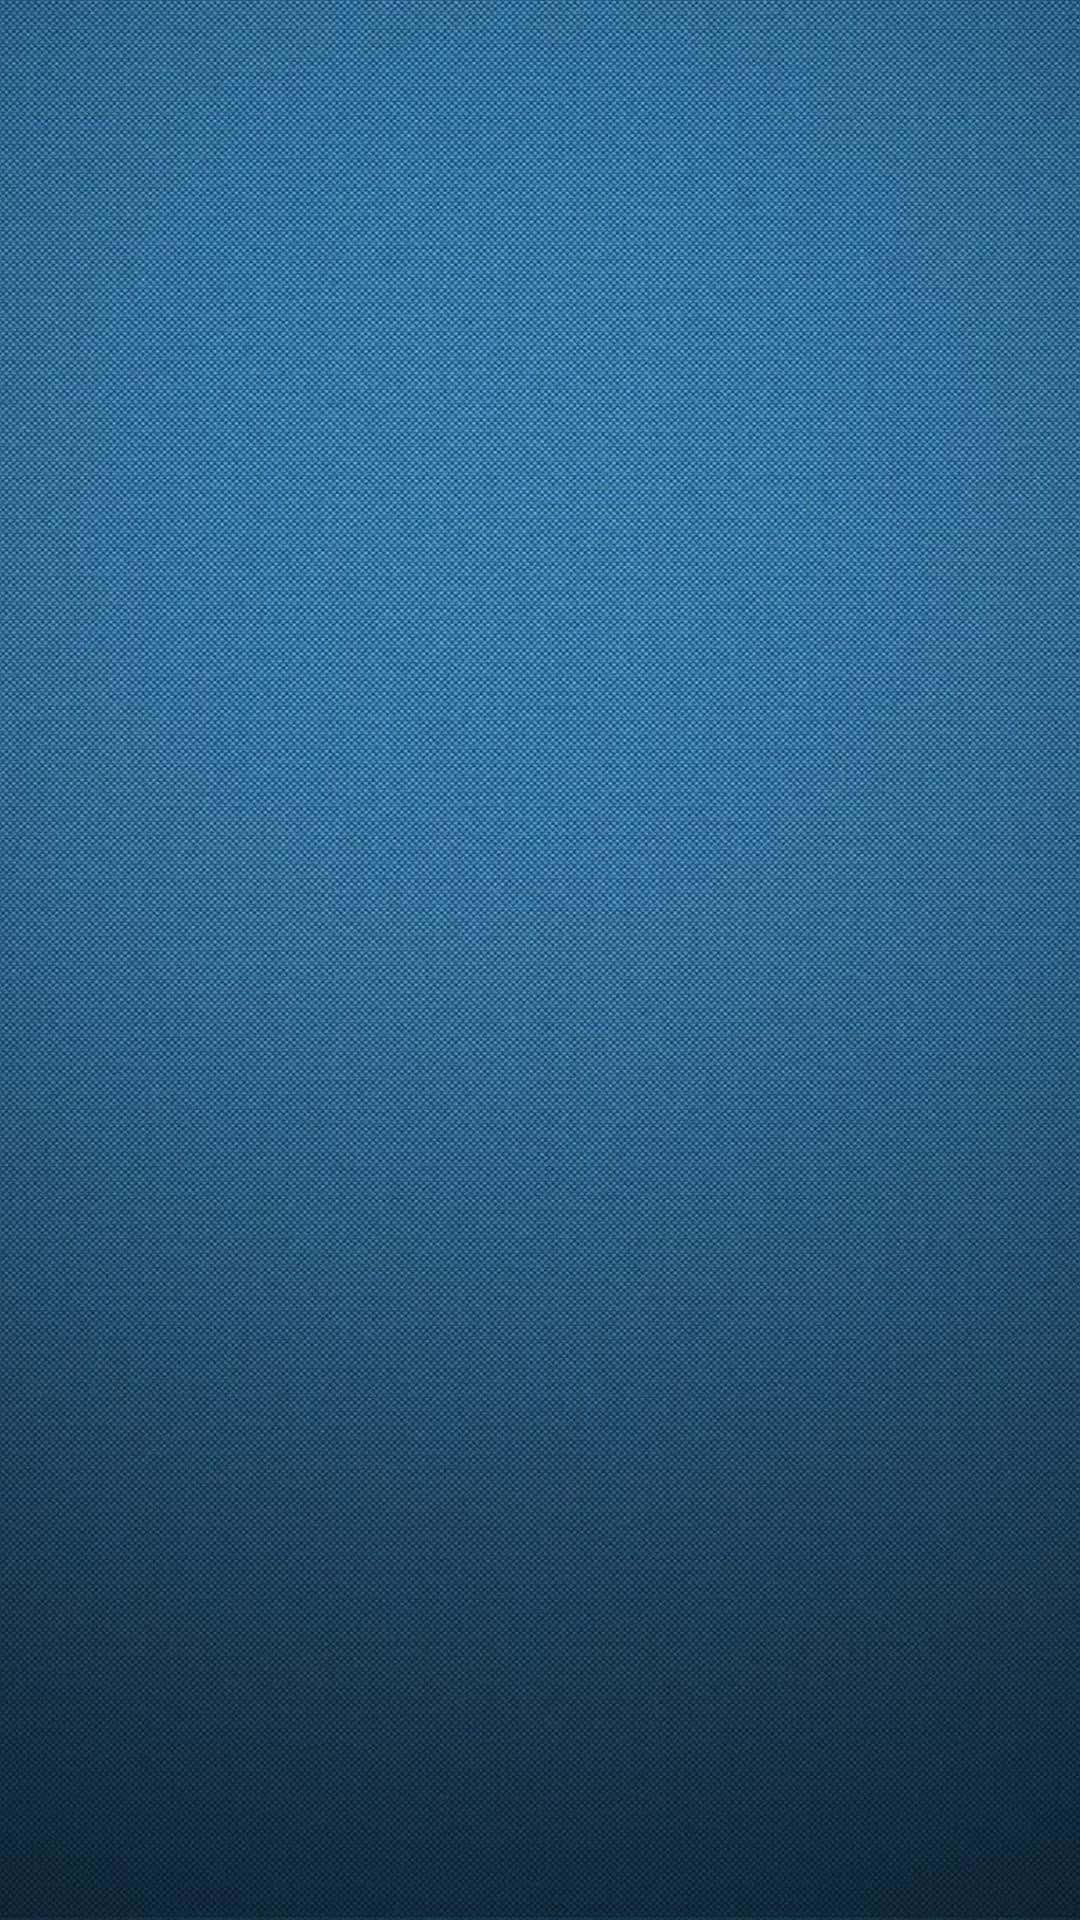 Solid Blue Iphone Background Wallpaper